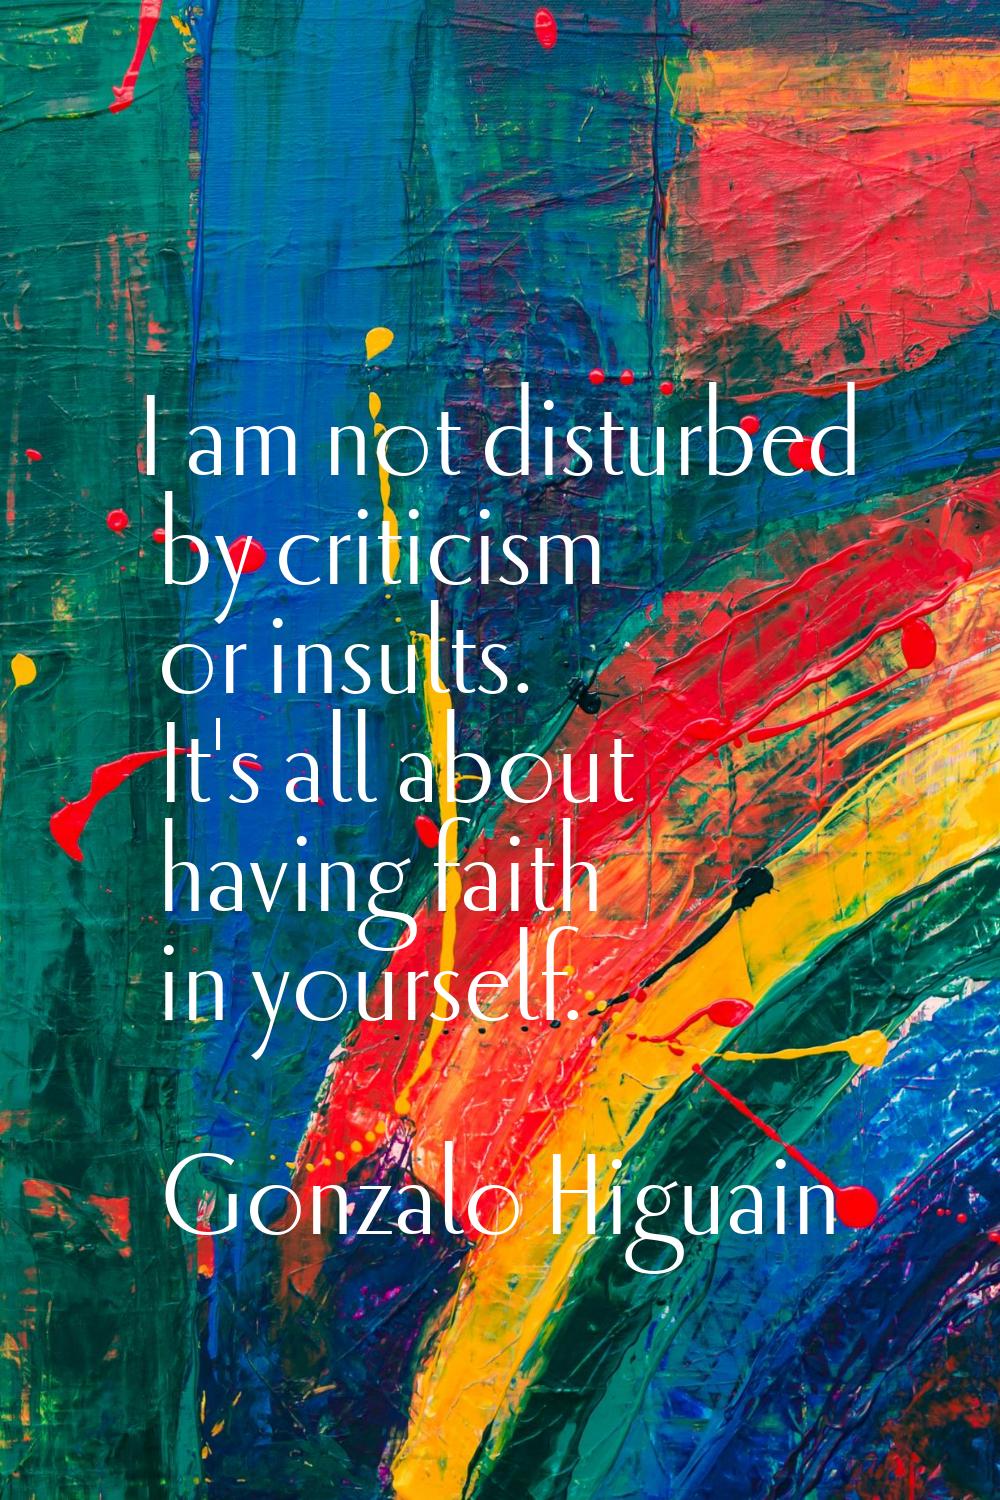 I am not disturbed by criticism or insults. It's all about having faith in yourself.